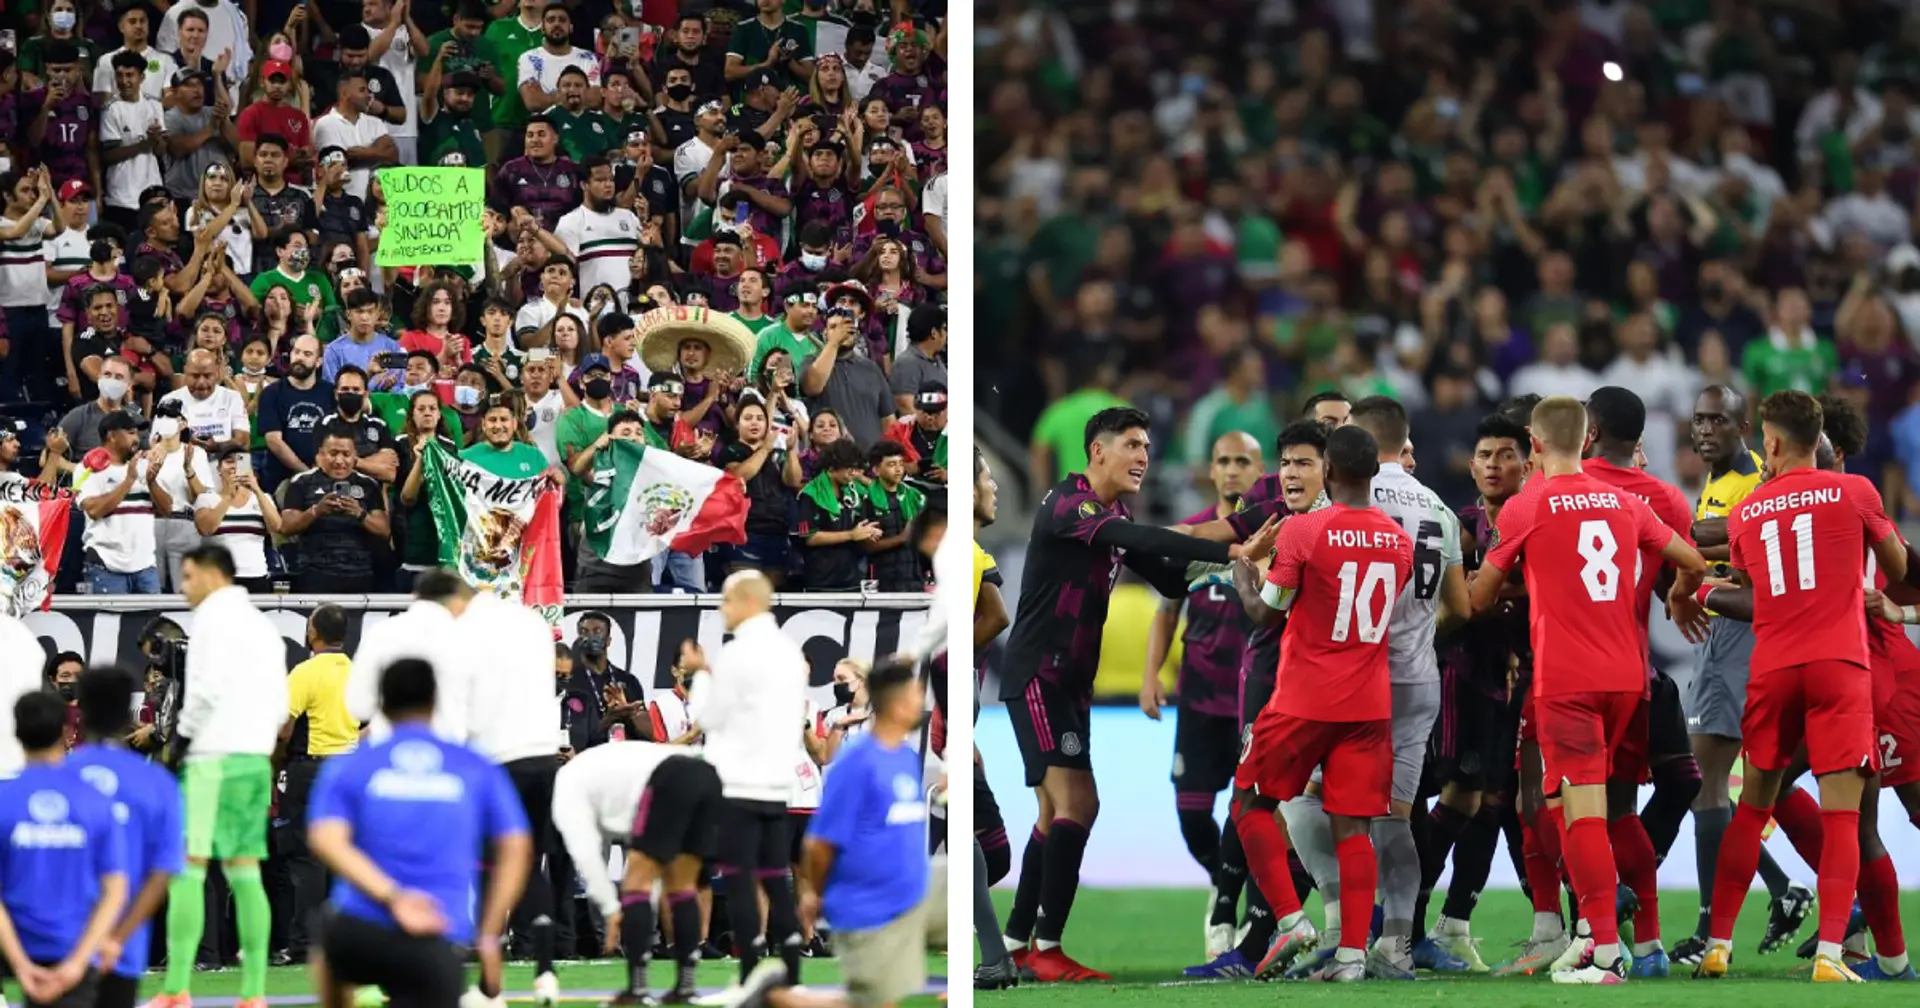 Mexico's Gold Cup clash against Canada halted due to anti-gay chants